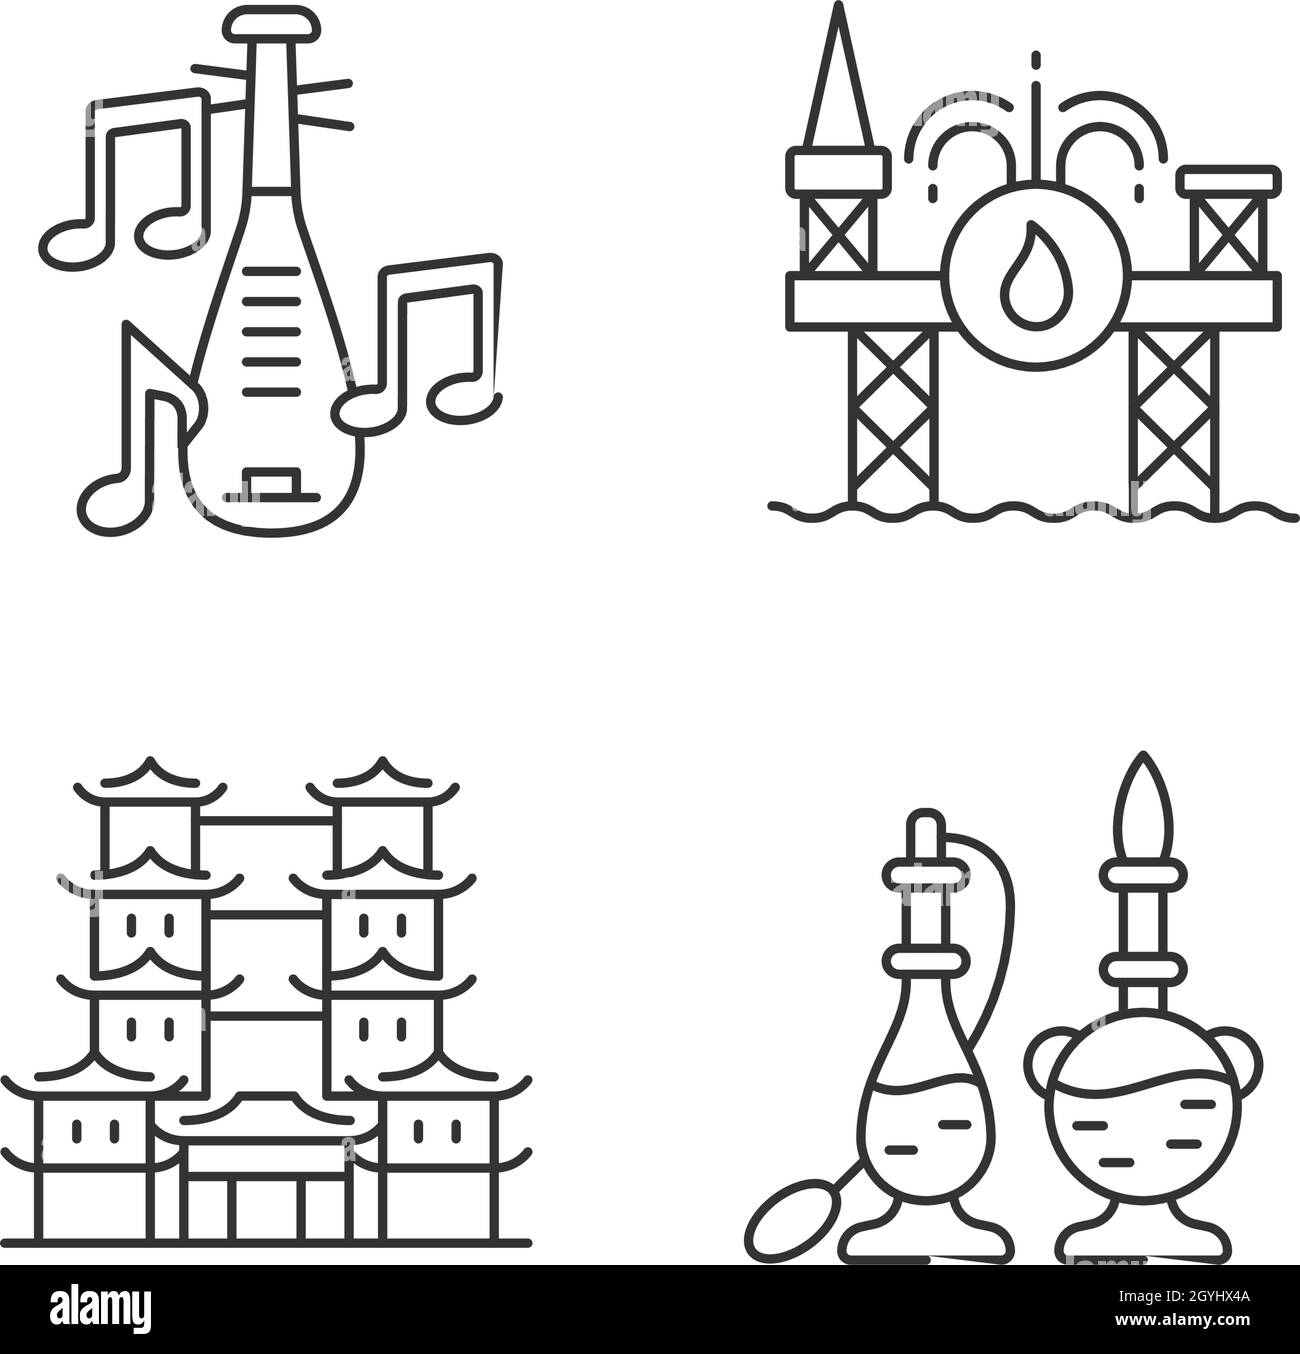 Culture of Singapore linear icons set Stock Vector